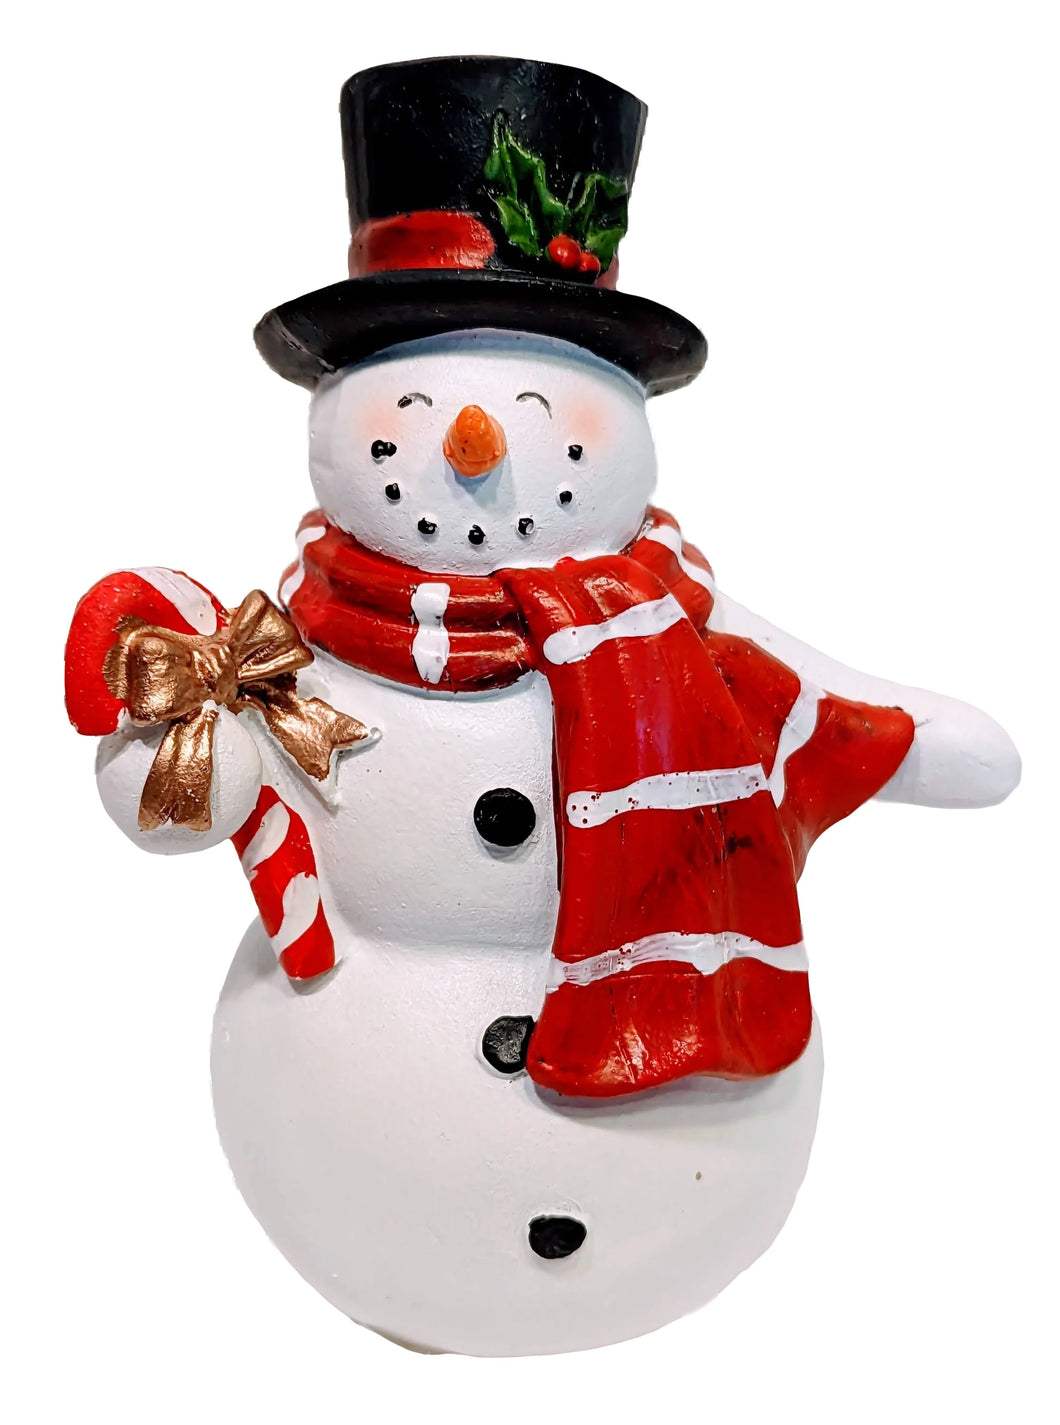 Vintage Snowman Figurine with Black Hat/Red/White Scarf Holding Candy Cane